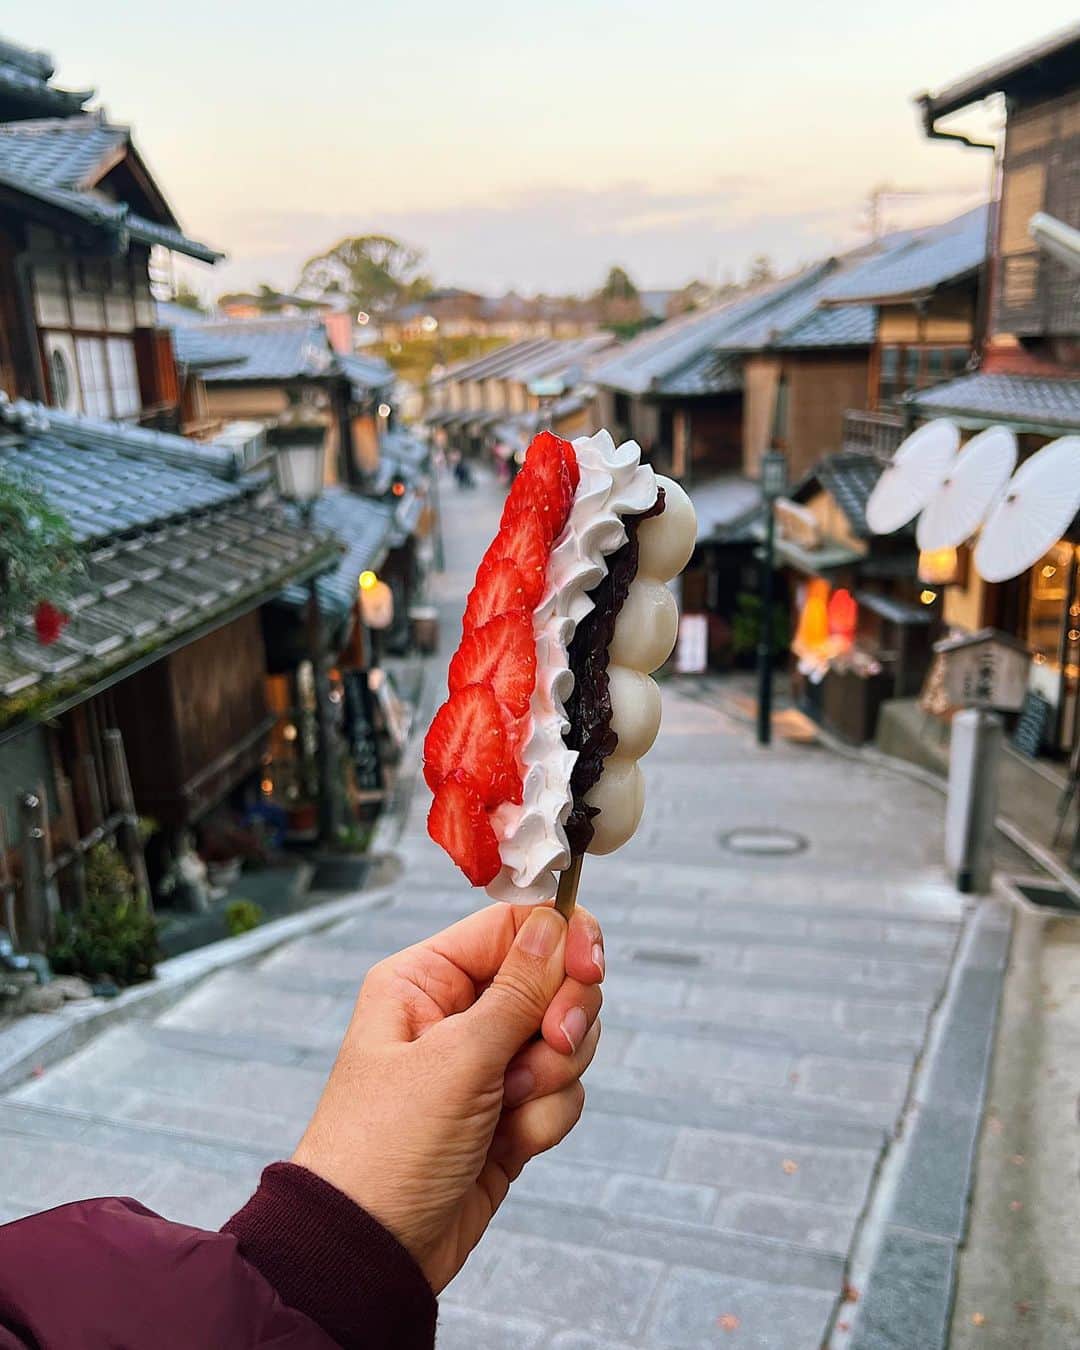 Girleatworldのインスタグラム：「Ichigo Daifuku Dango at Ninenzaka in Kyoto, a marriage of two beloved Japanese dessert: Ichigo Daifuku (strawberry mochi with red bean paste) 🍓and dango (sweet rice dumplings) 🍡 And yeah, I was holding on to the dango very tightly bc I was so scared of dropping it before I get to take a bite 🤪  Four years ago, I took a picture of the more traditional Ichigo Daifuku, right around the corner from this spot. I had been to Kyoto twice, once at its prime during sakura season and once during momiji leaf season. This time, I arrived to a very different Kyoto - very quiet with almost no foreign visitors, and so very bare. There were only a handful other people on this street even though it was only 3pm. I suppose I was grateful to experience Kyoto this way, but I couldn't help feeling sad too. It felt like a crime enjoying such beautiful place almost to ourselves.  #shotoniphone #iphone13promax #ichigodaifuku #dango #kyoto #ninenzaka #ichigo #🍡 #🍓」